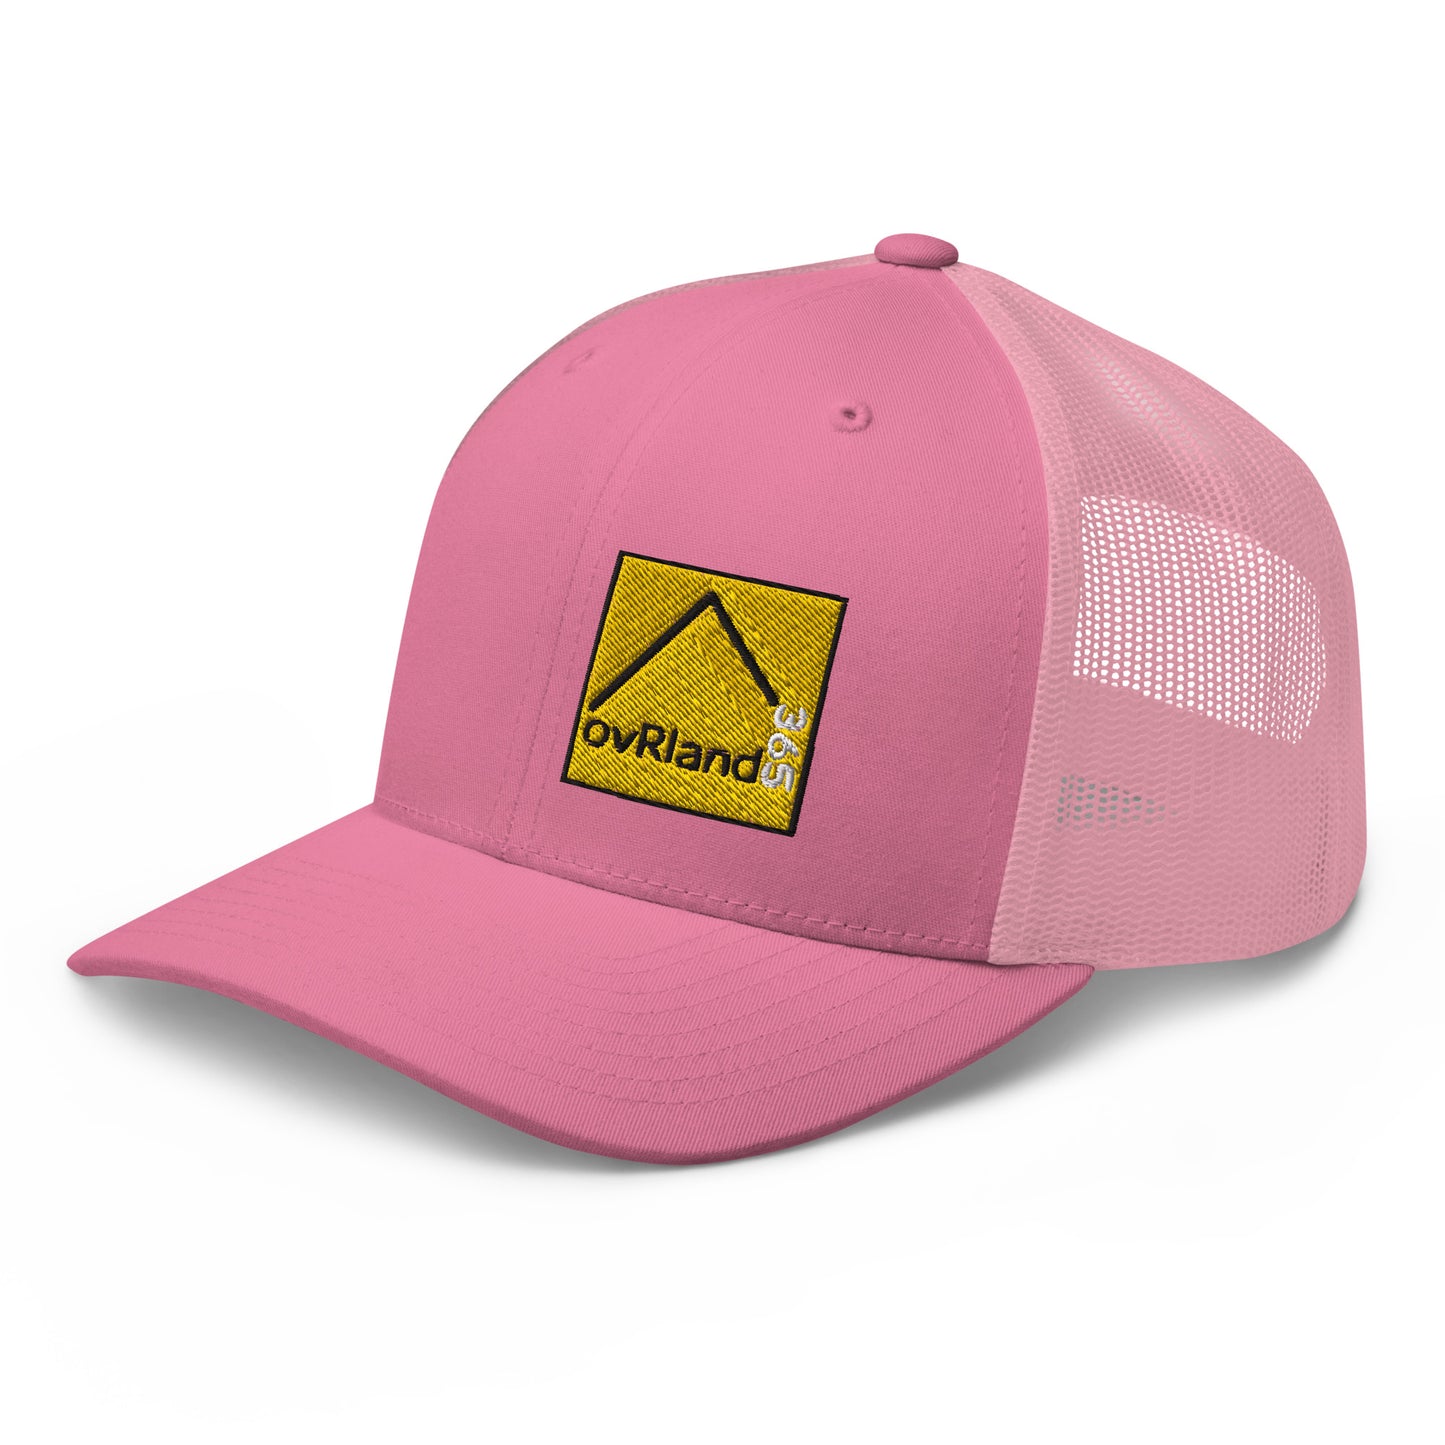 Pink Snap Back Trucker Cap with our square 365 logo. side facing. overland365.com